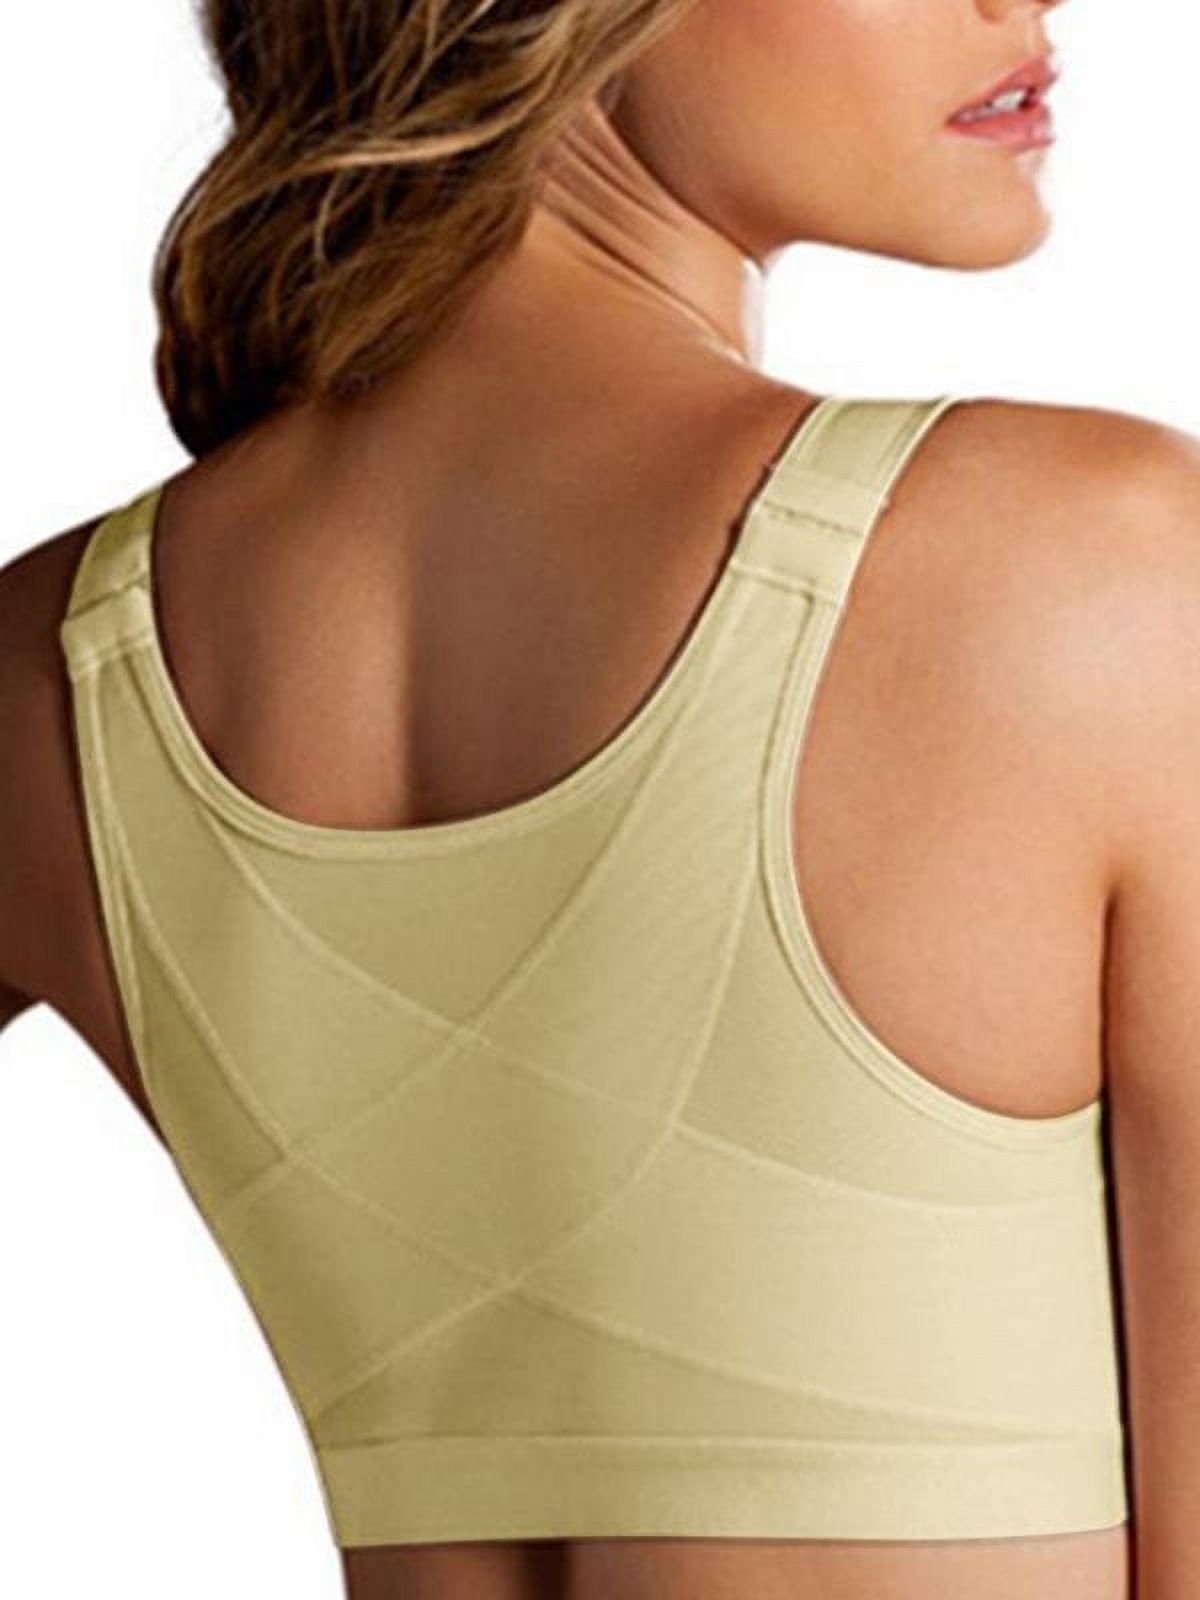 Women's Full Figure No Bounce Plus Size Camisole Wirefree Back Close Sports Bra - image 2 of 4